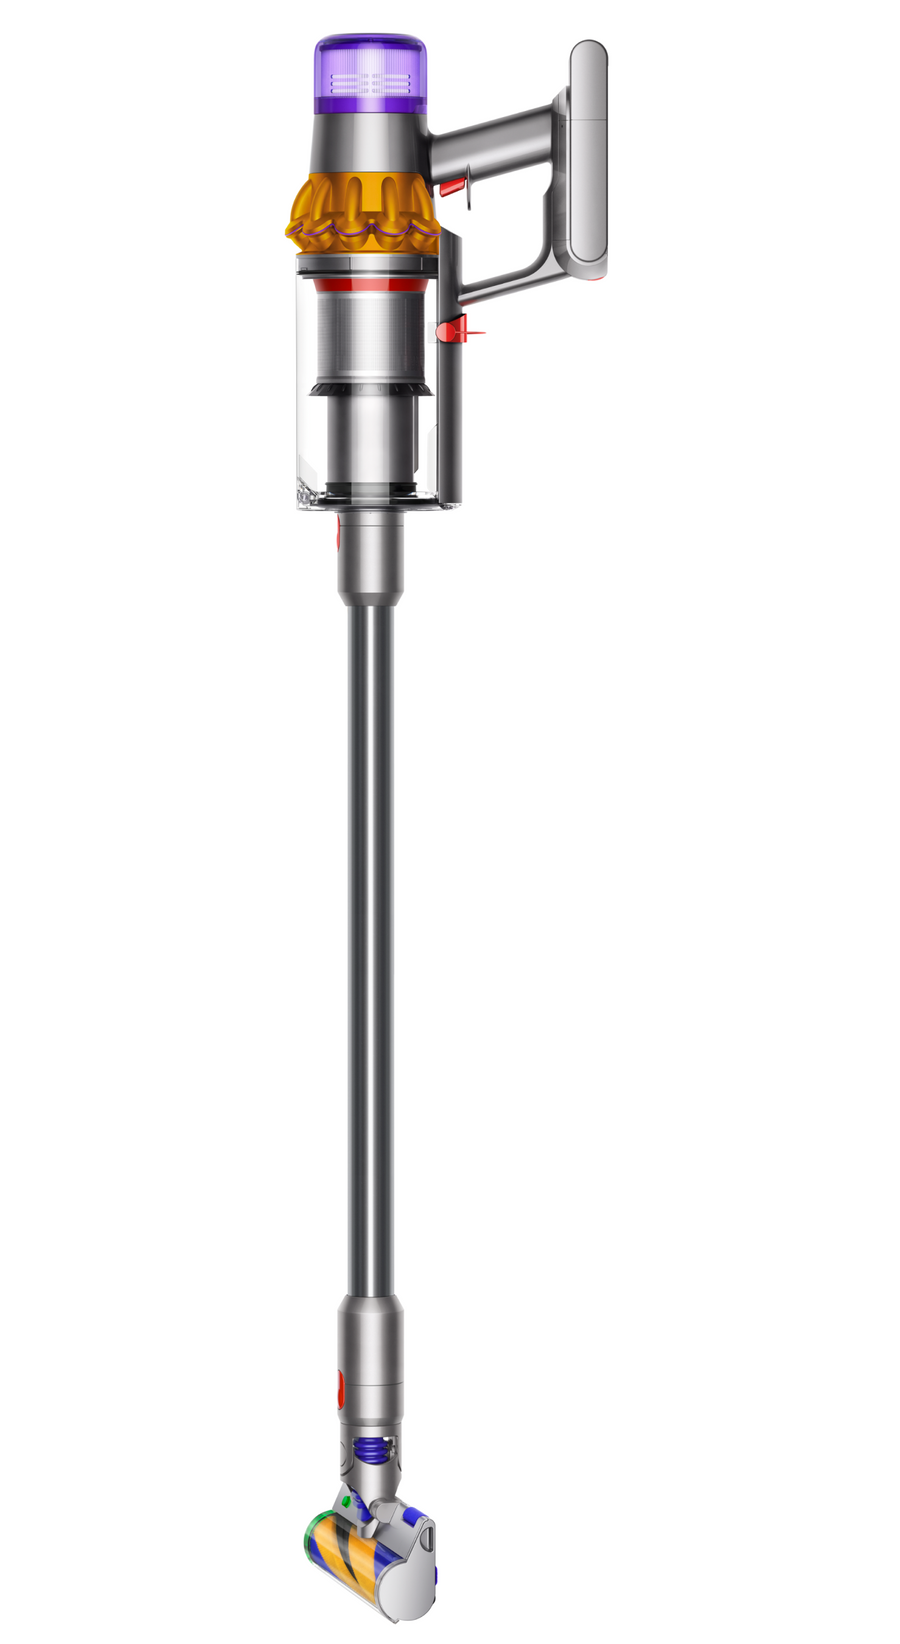 Dyson V15 Detect™ Absolute vacuum cleaner